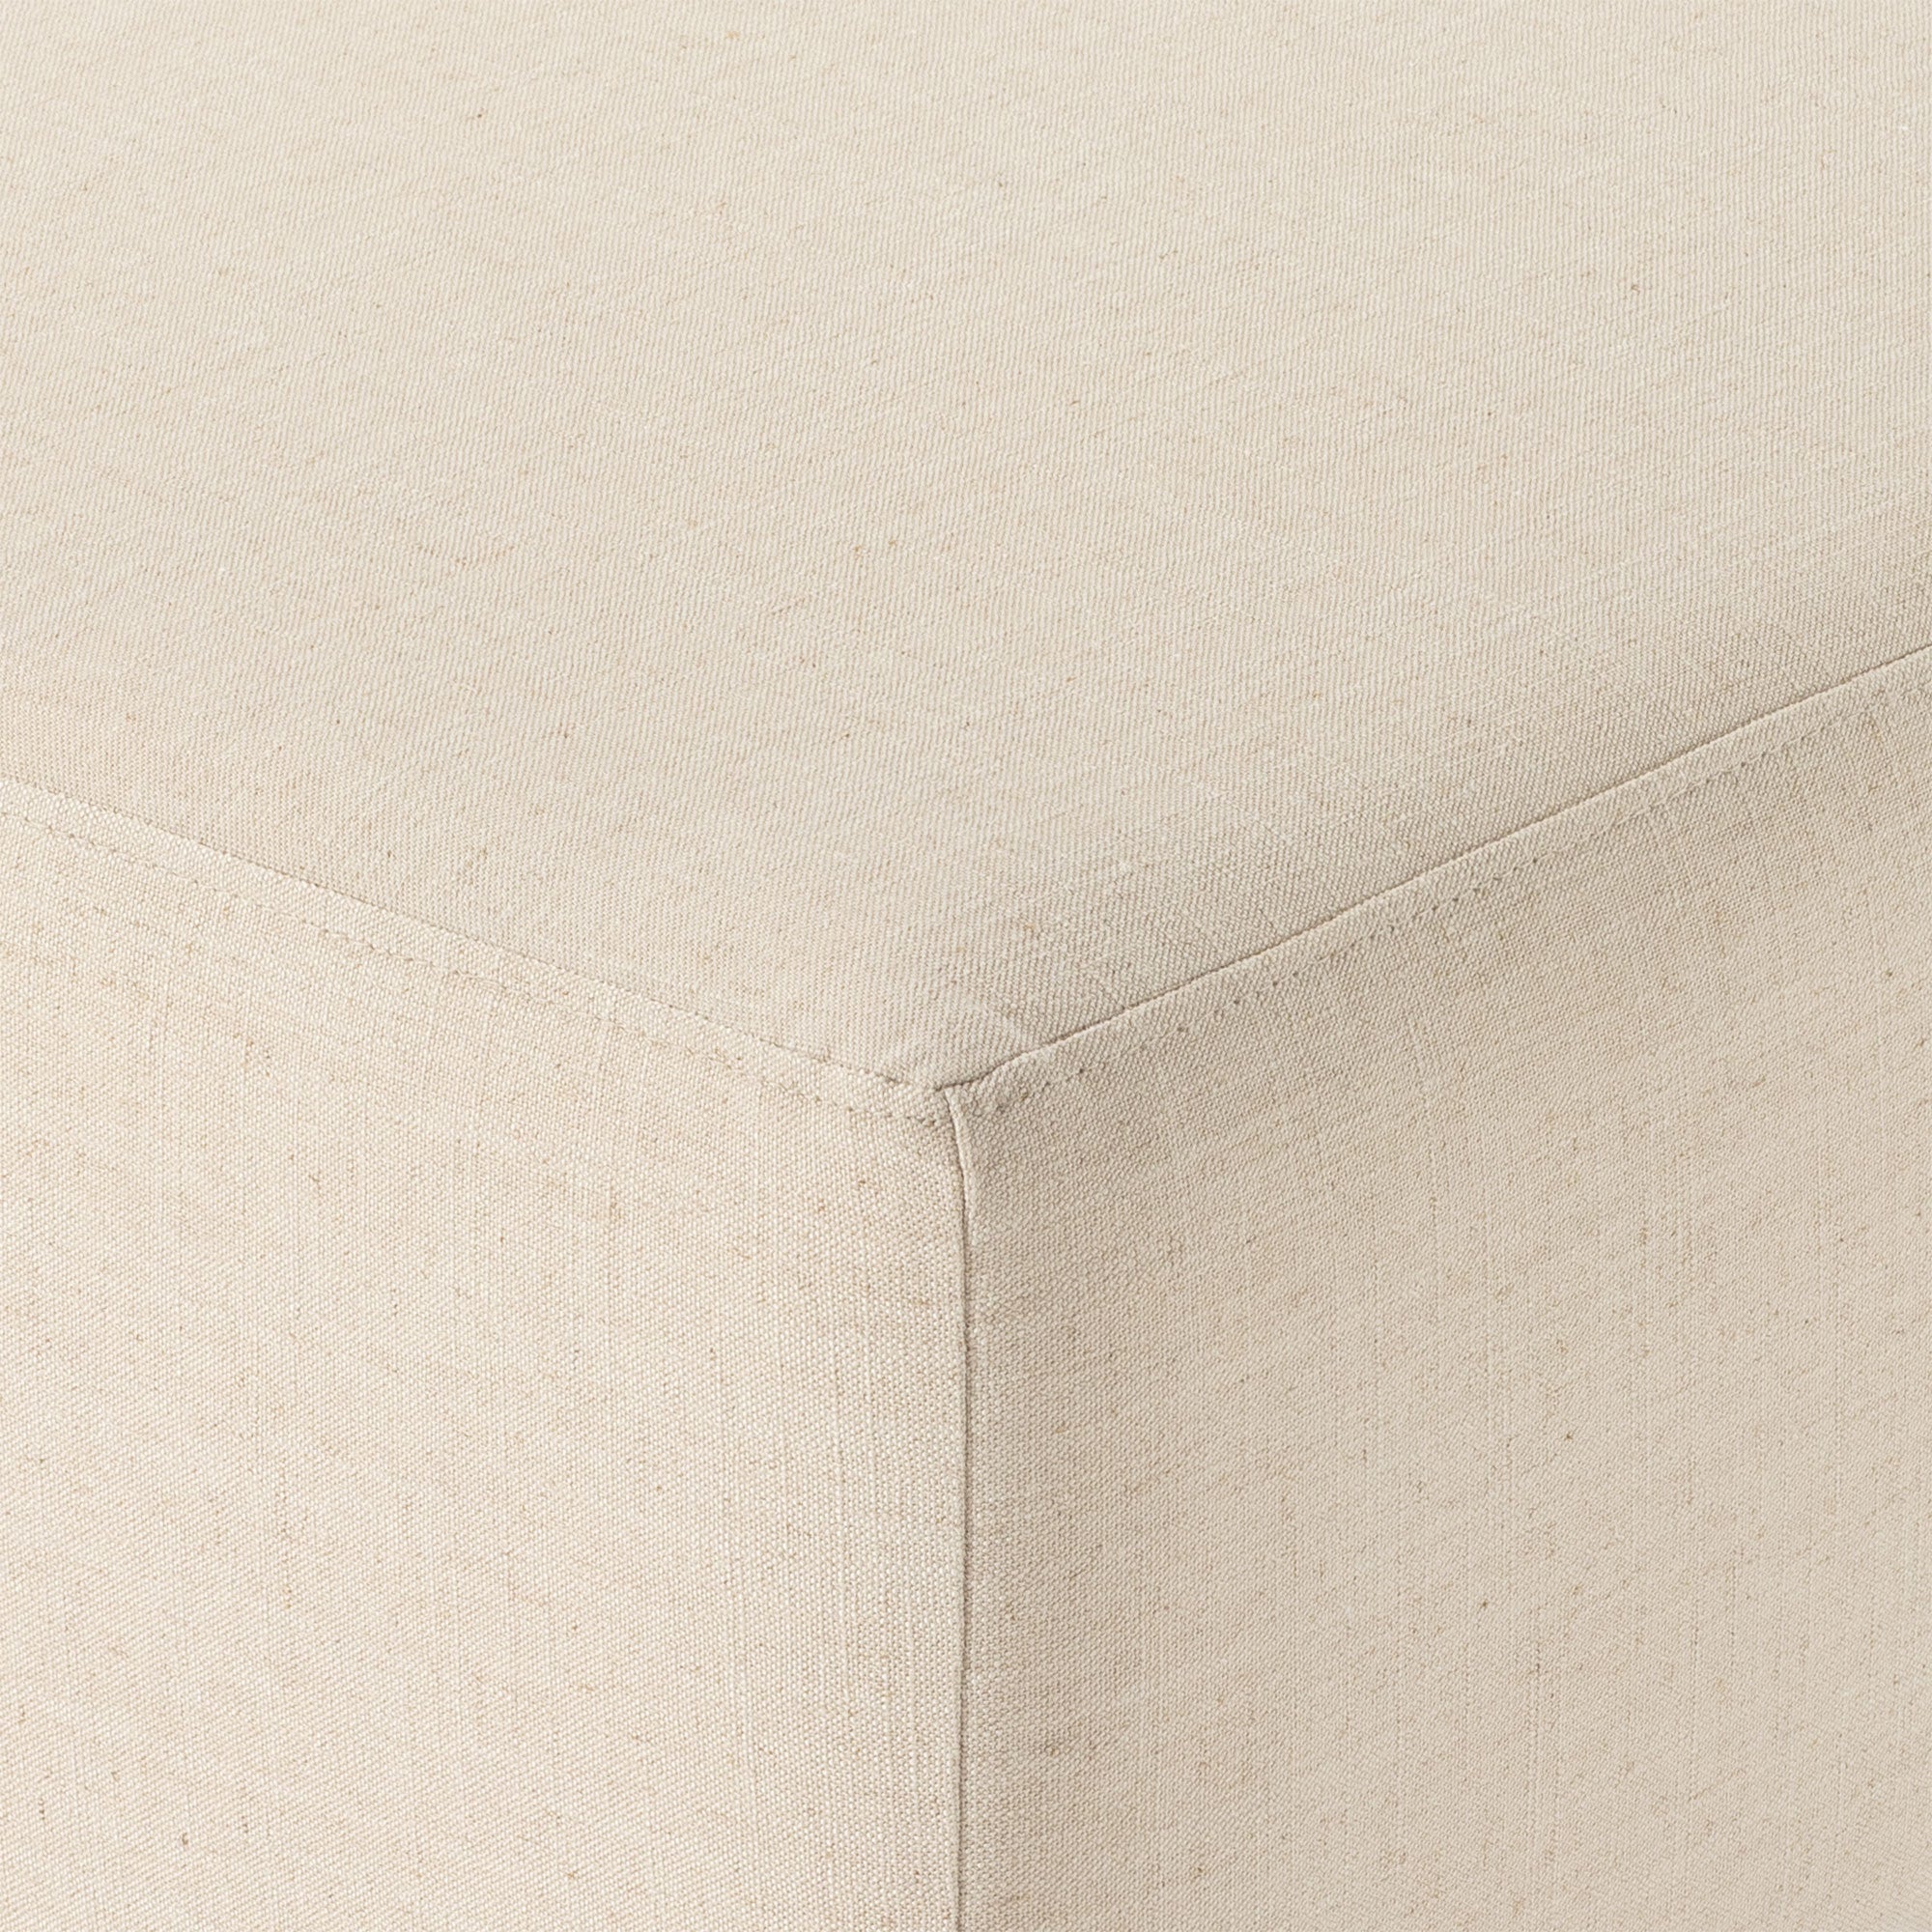 Lena Contemporary Upholstered Ottoman with Refined Natural Wood Finish in Ottomans & Benches by Maven Lane